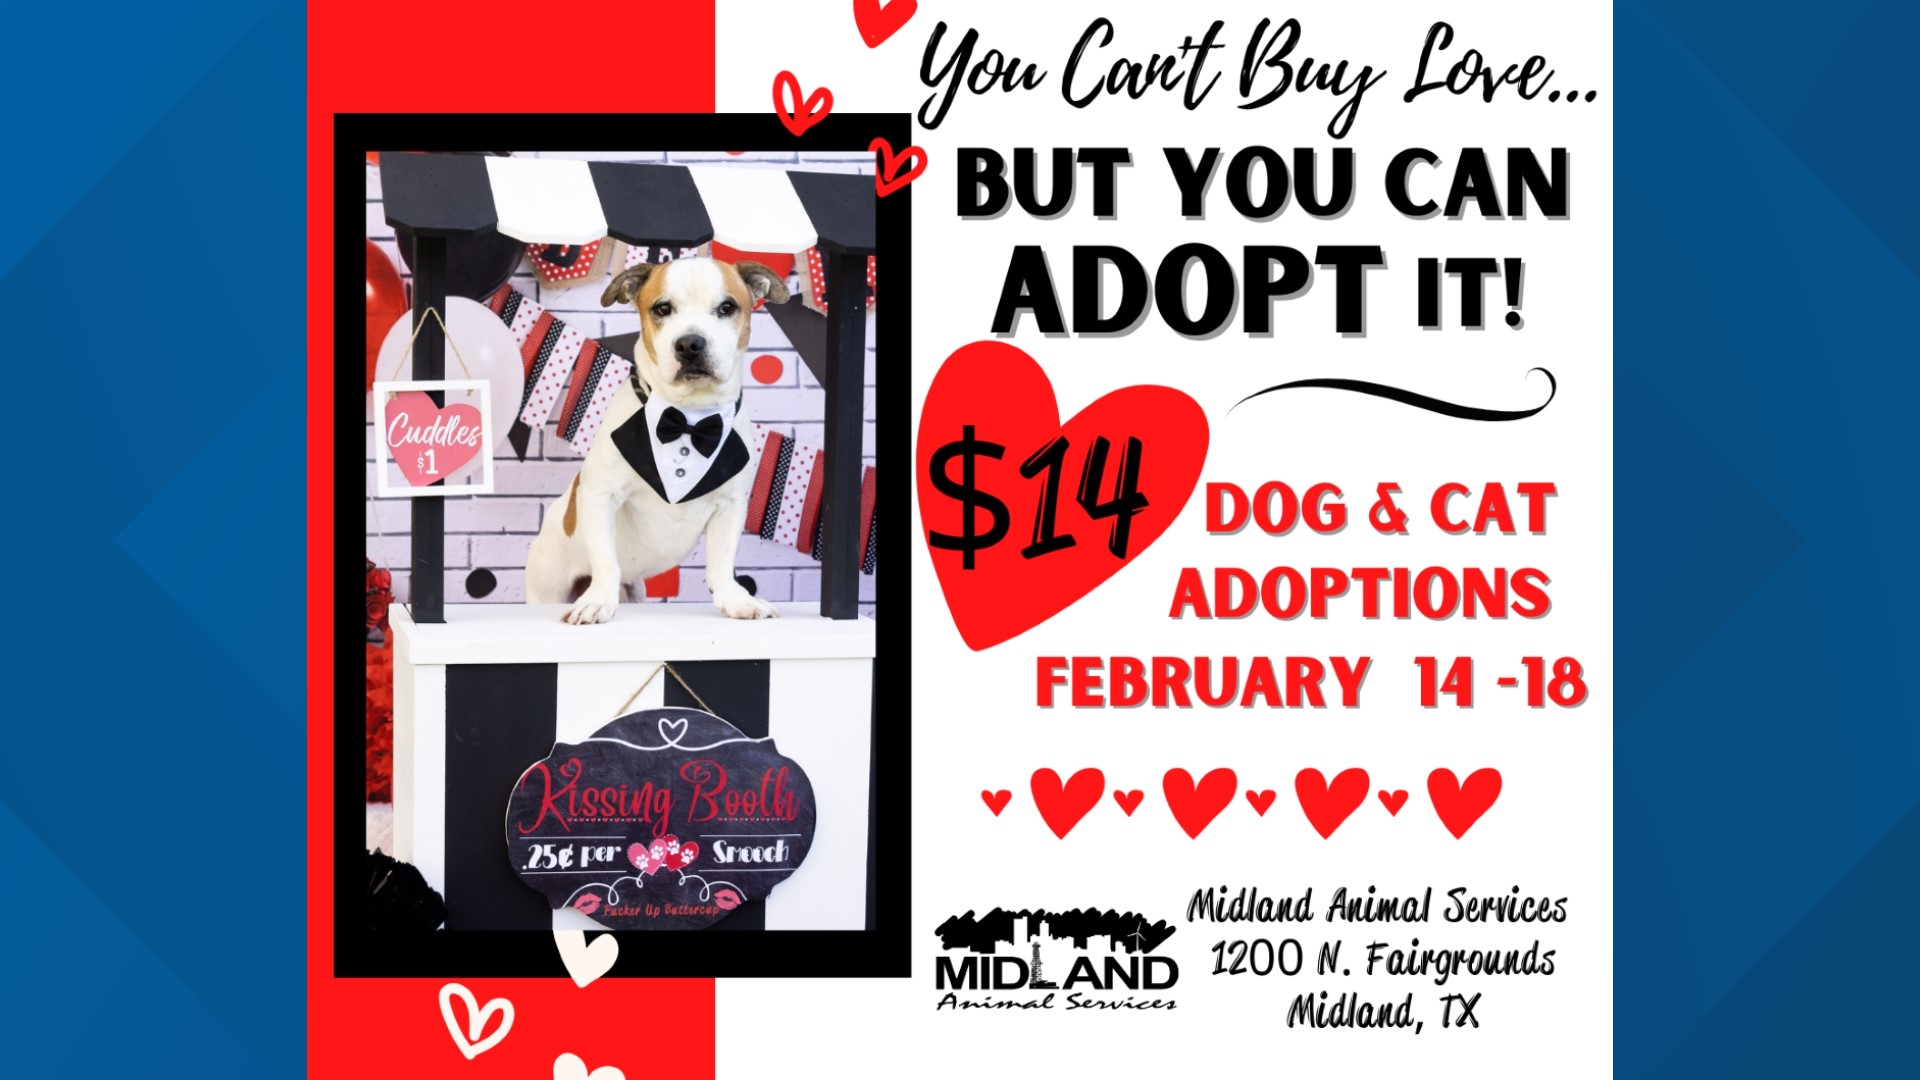 City of Midland Animal Services to begin 'Be Mine' adoption specials on  Feb. 14 